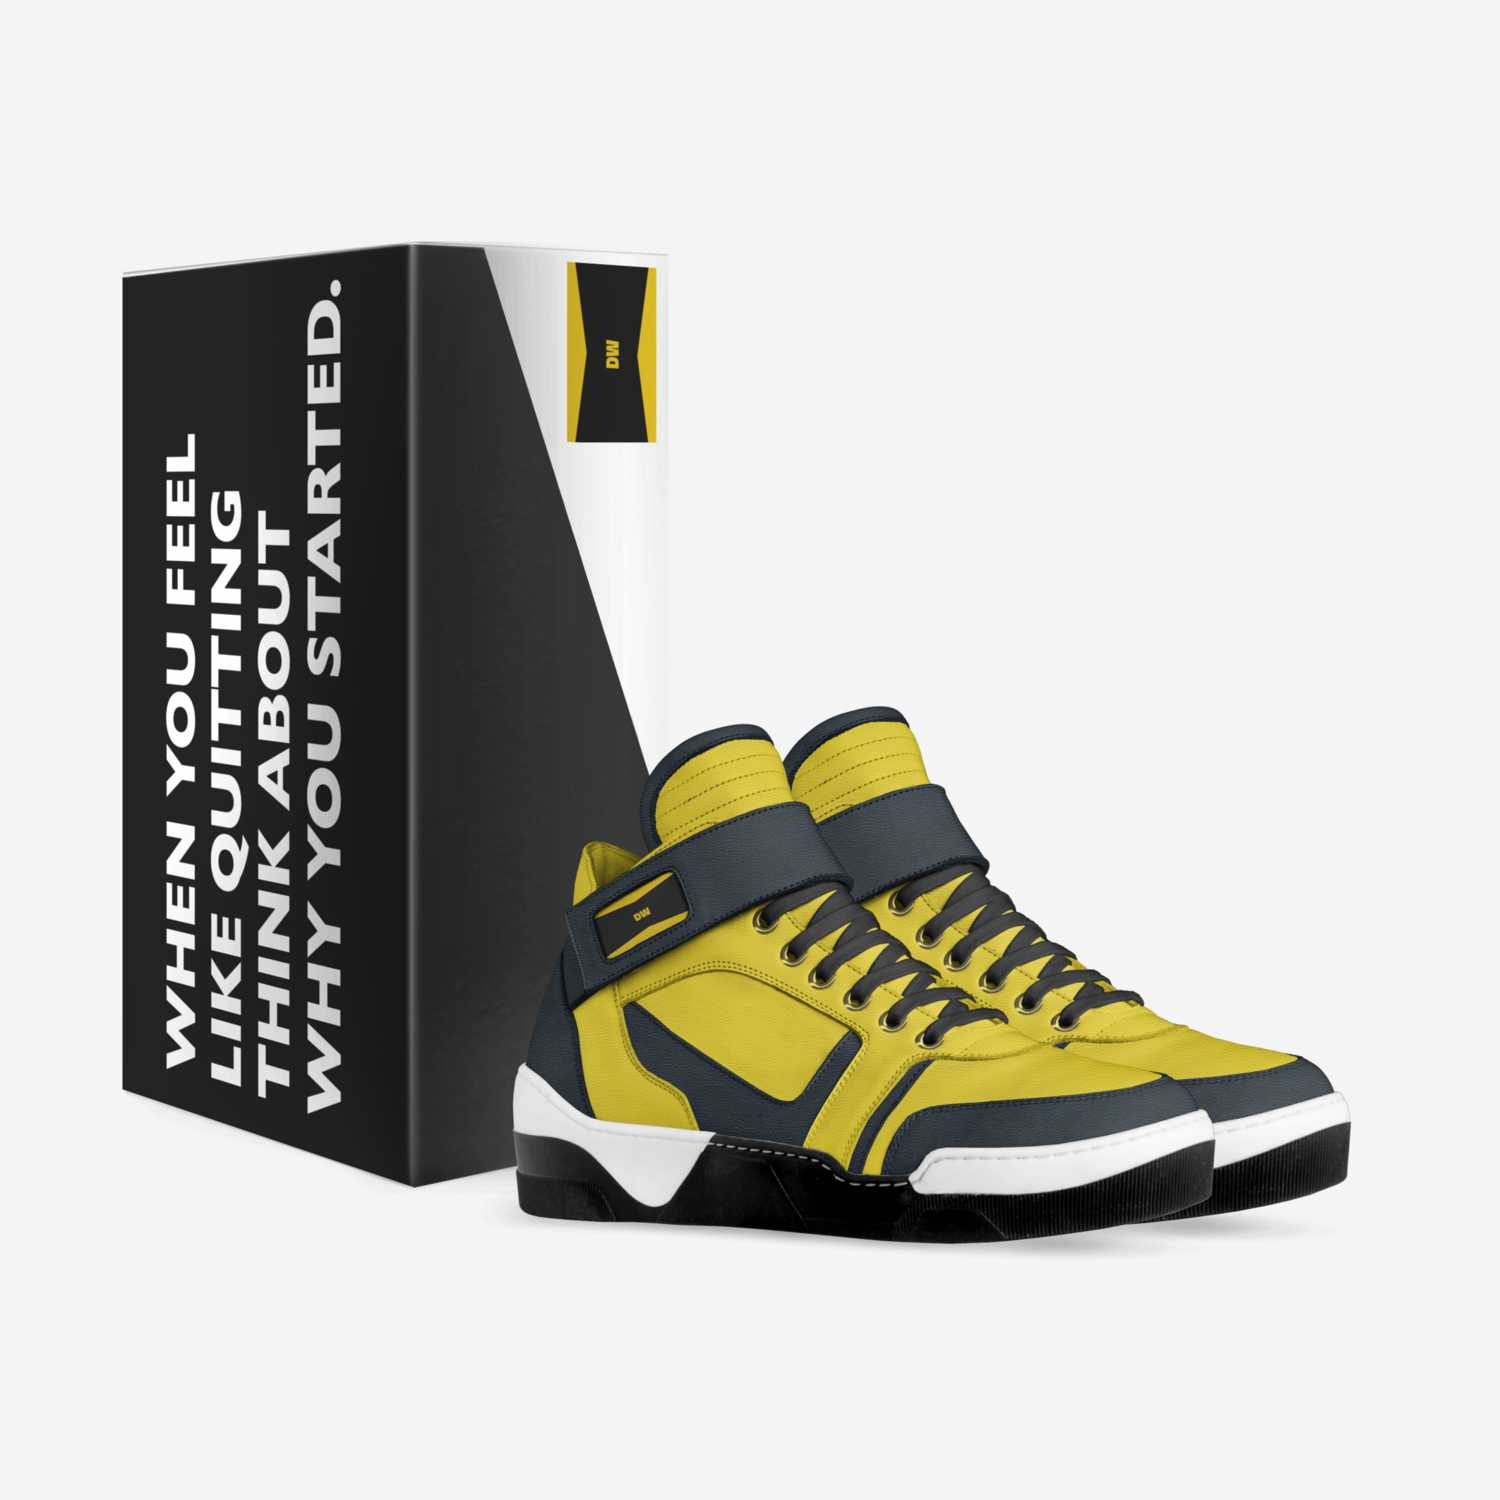 DW custom made in Italy shoes by Dyson Westgate | Box view